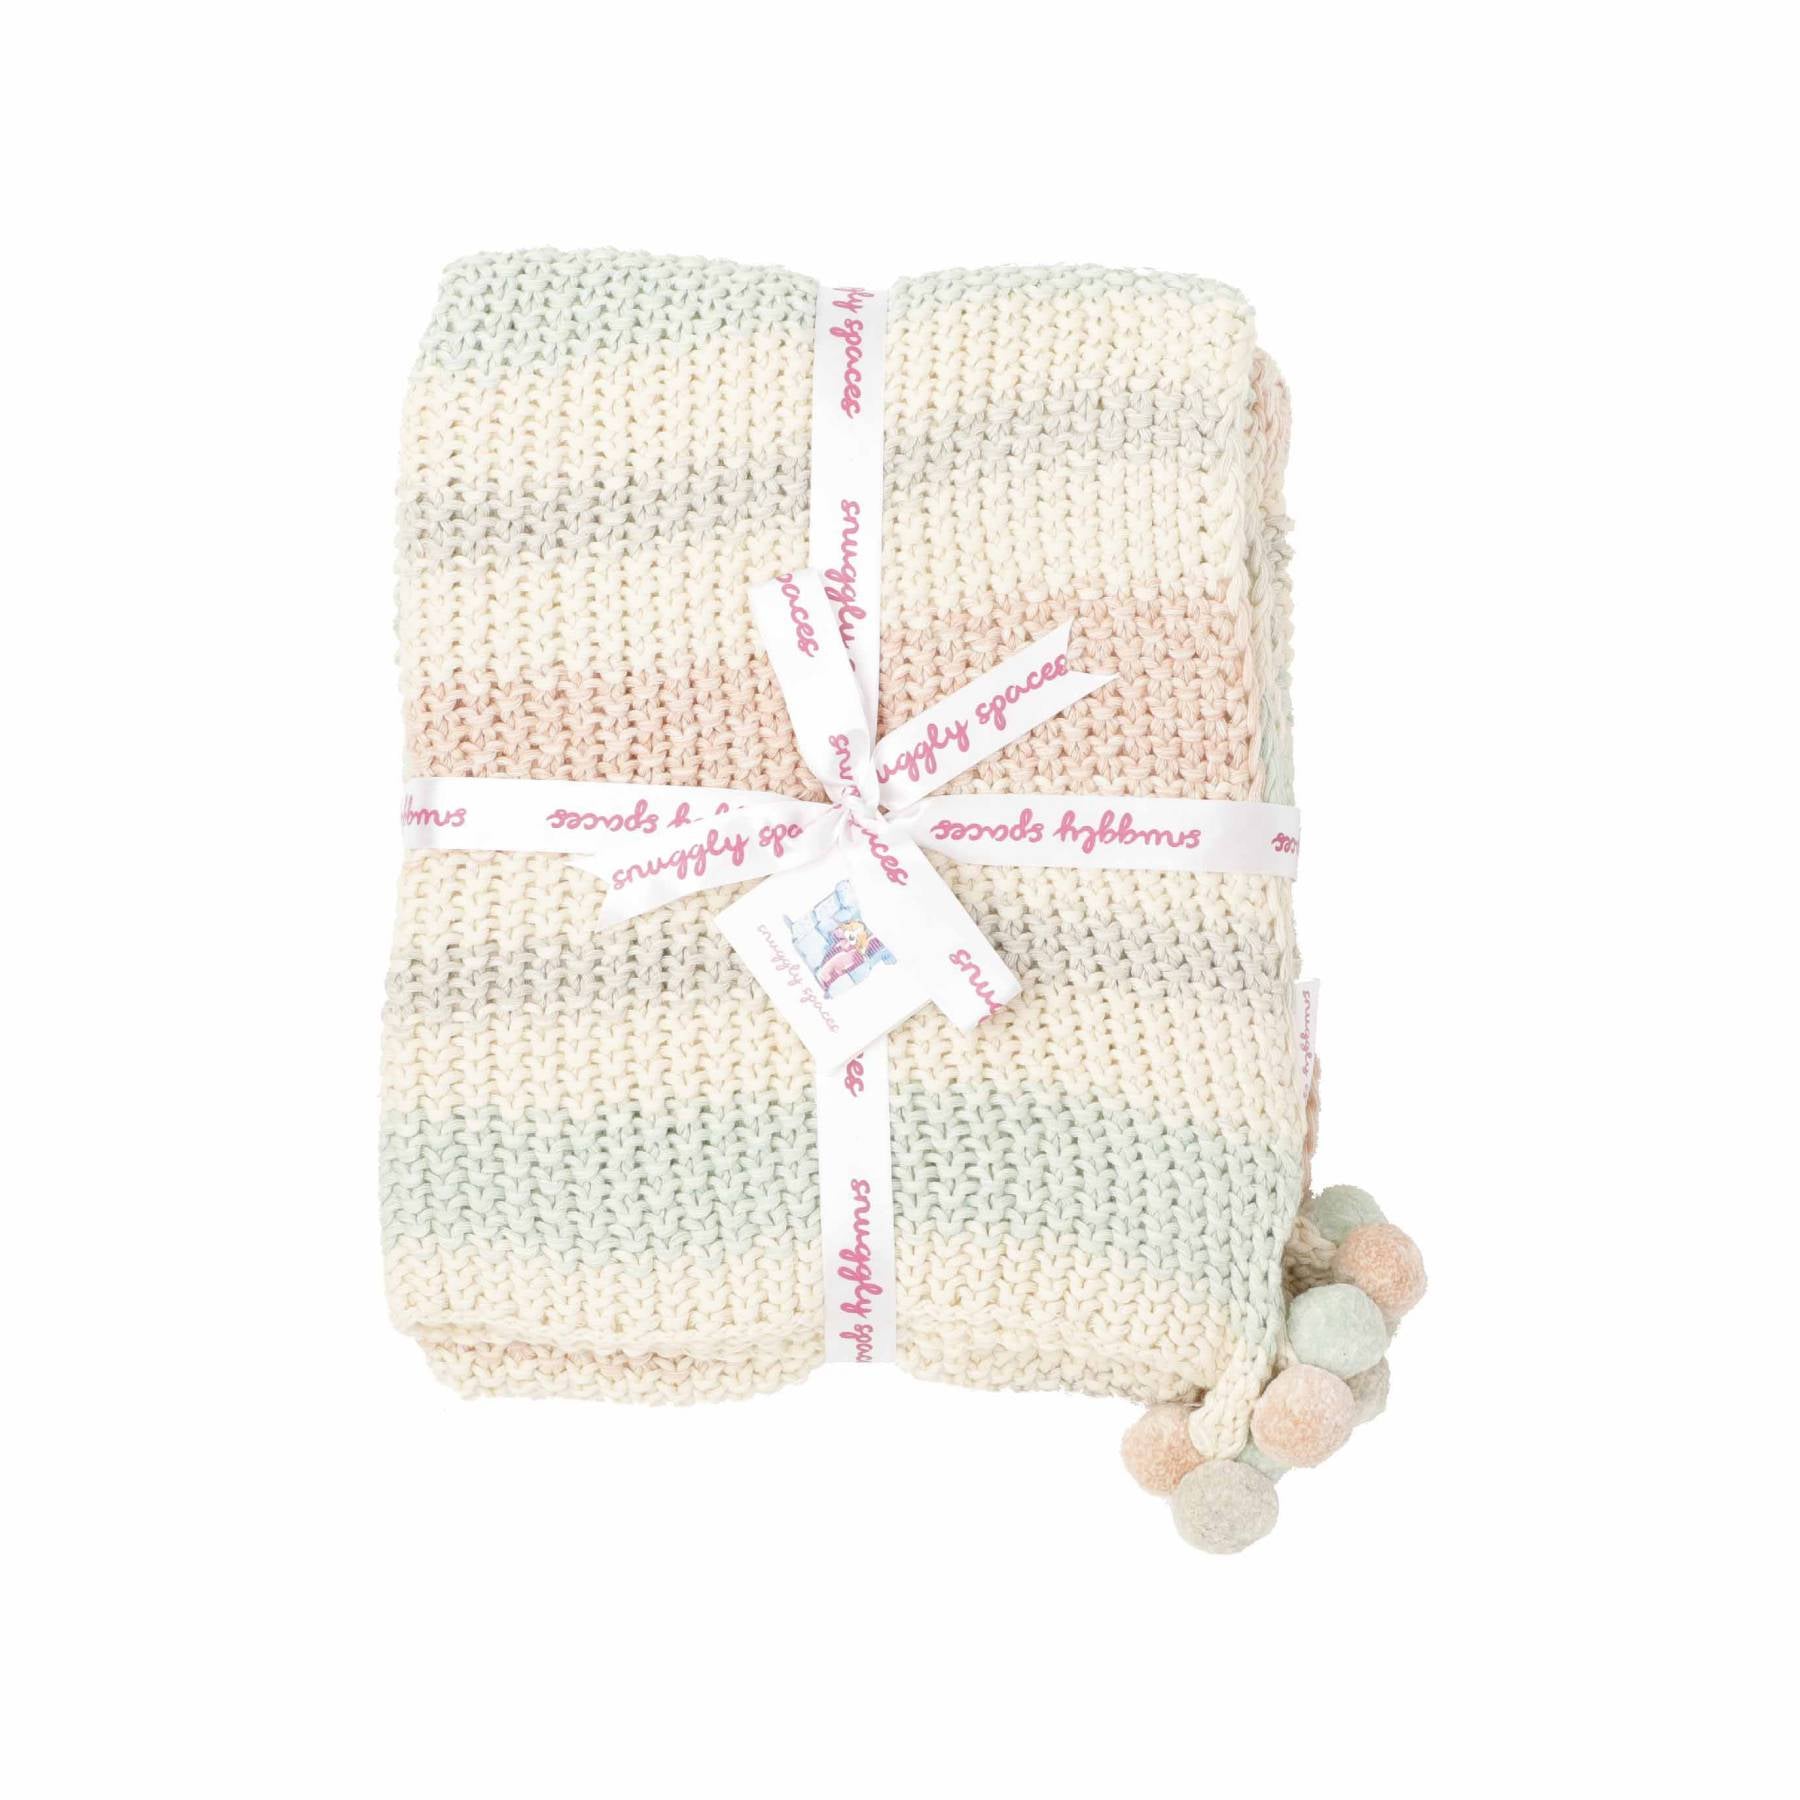 Snuggly Knitted Blanket - Pastel Stripes